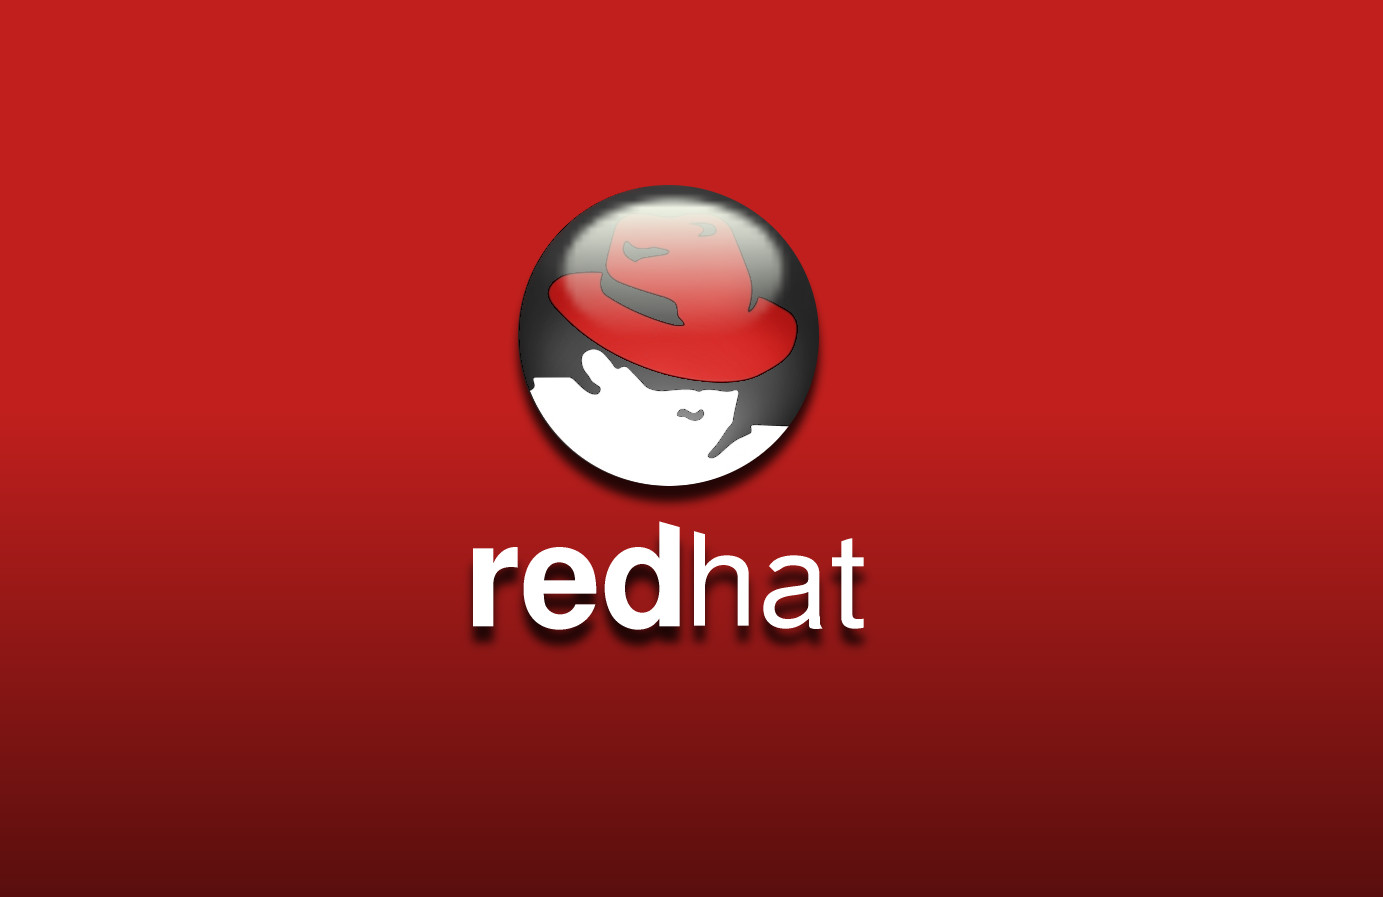 Red hat 2. Red hat. Red hat оперативка. Red hat 4. Дистрибутив Red hat.